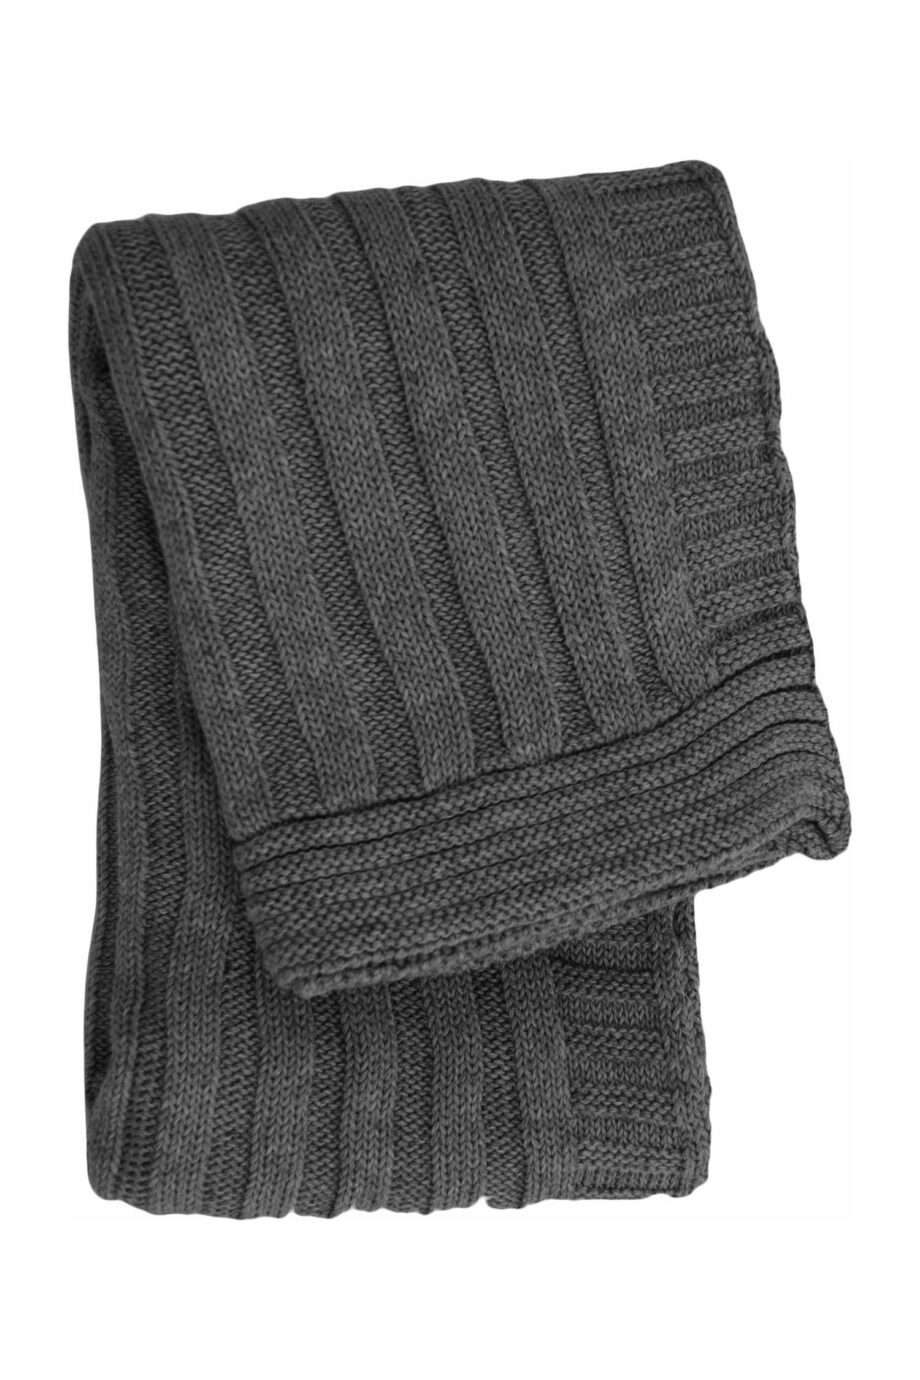 ribs anthracite knitted cotton little blanket small